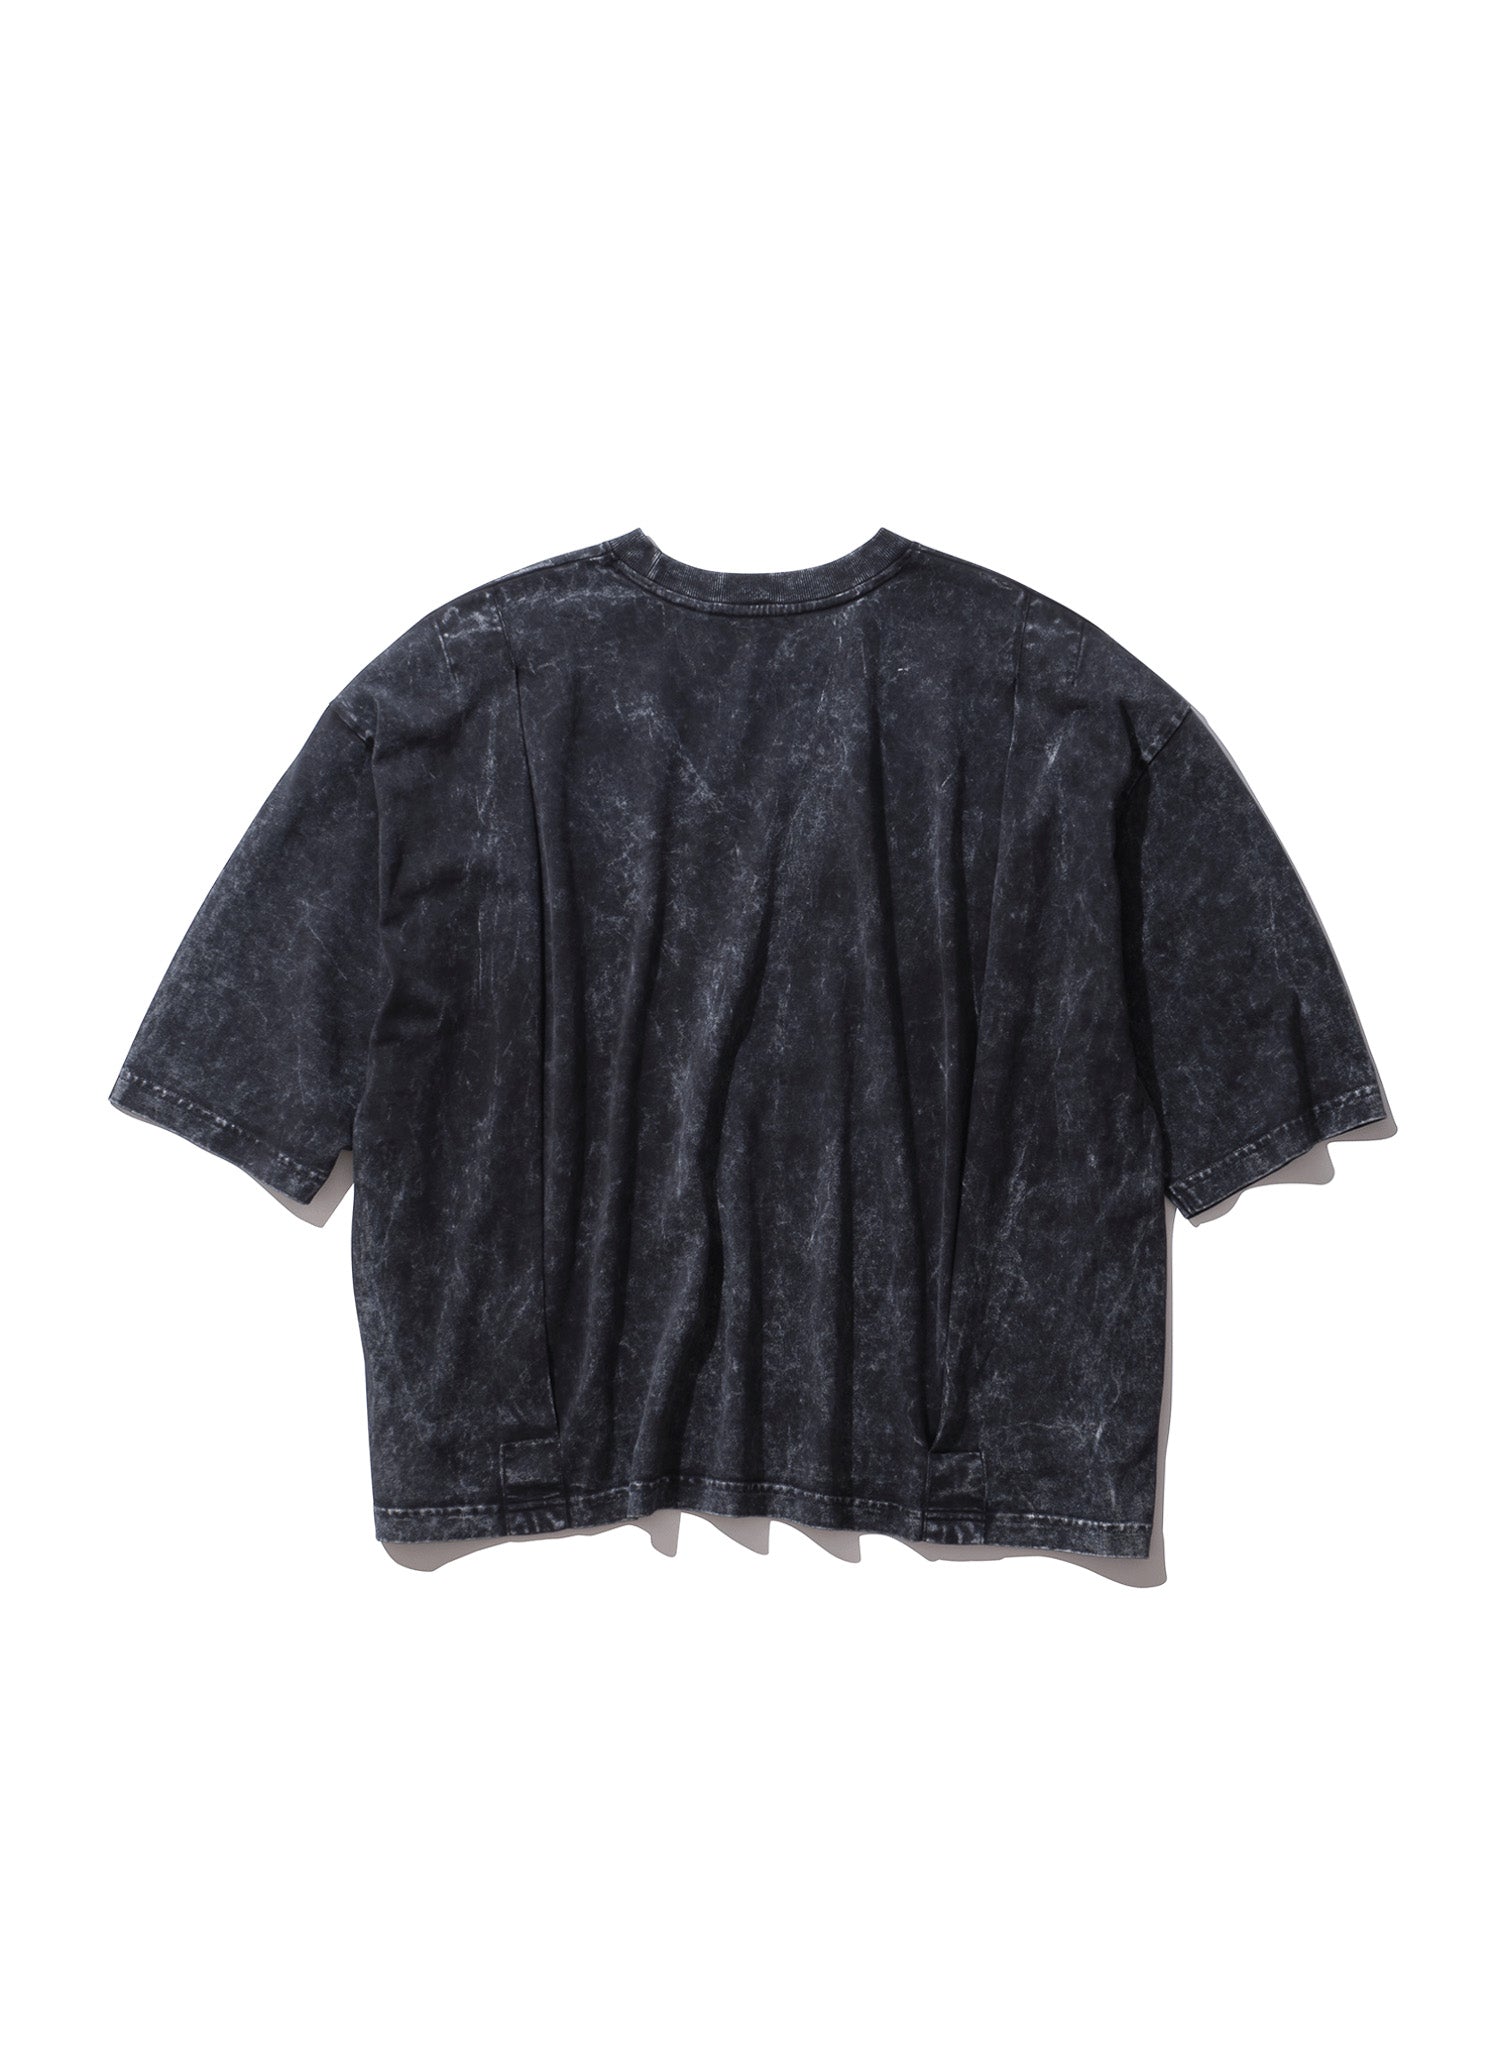 <span style="color: #f50b0b;">Last One</span> WILLY CHAVARRIA / SS BUFFALO T WASHED BLACK